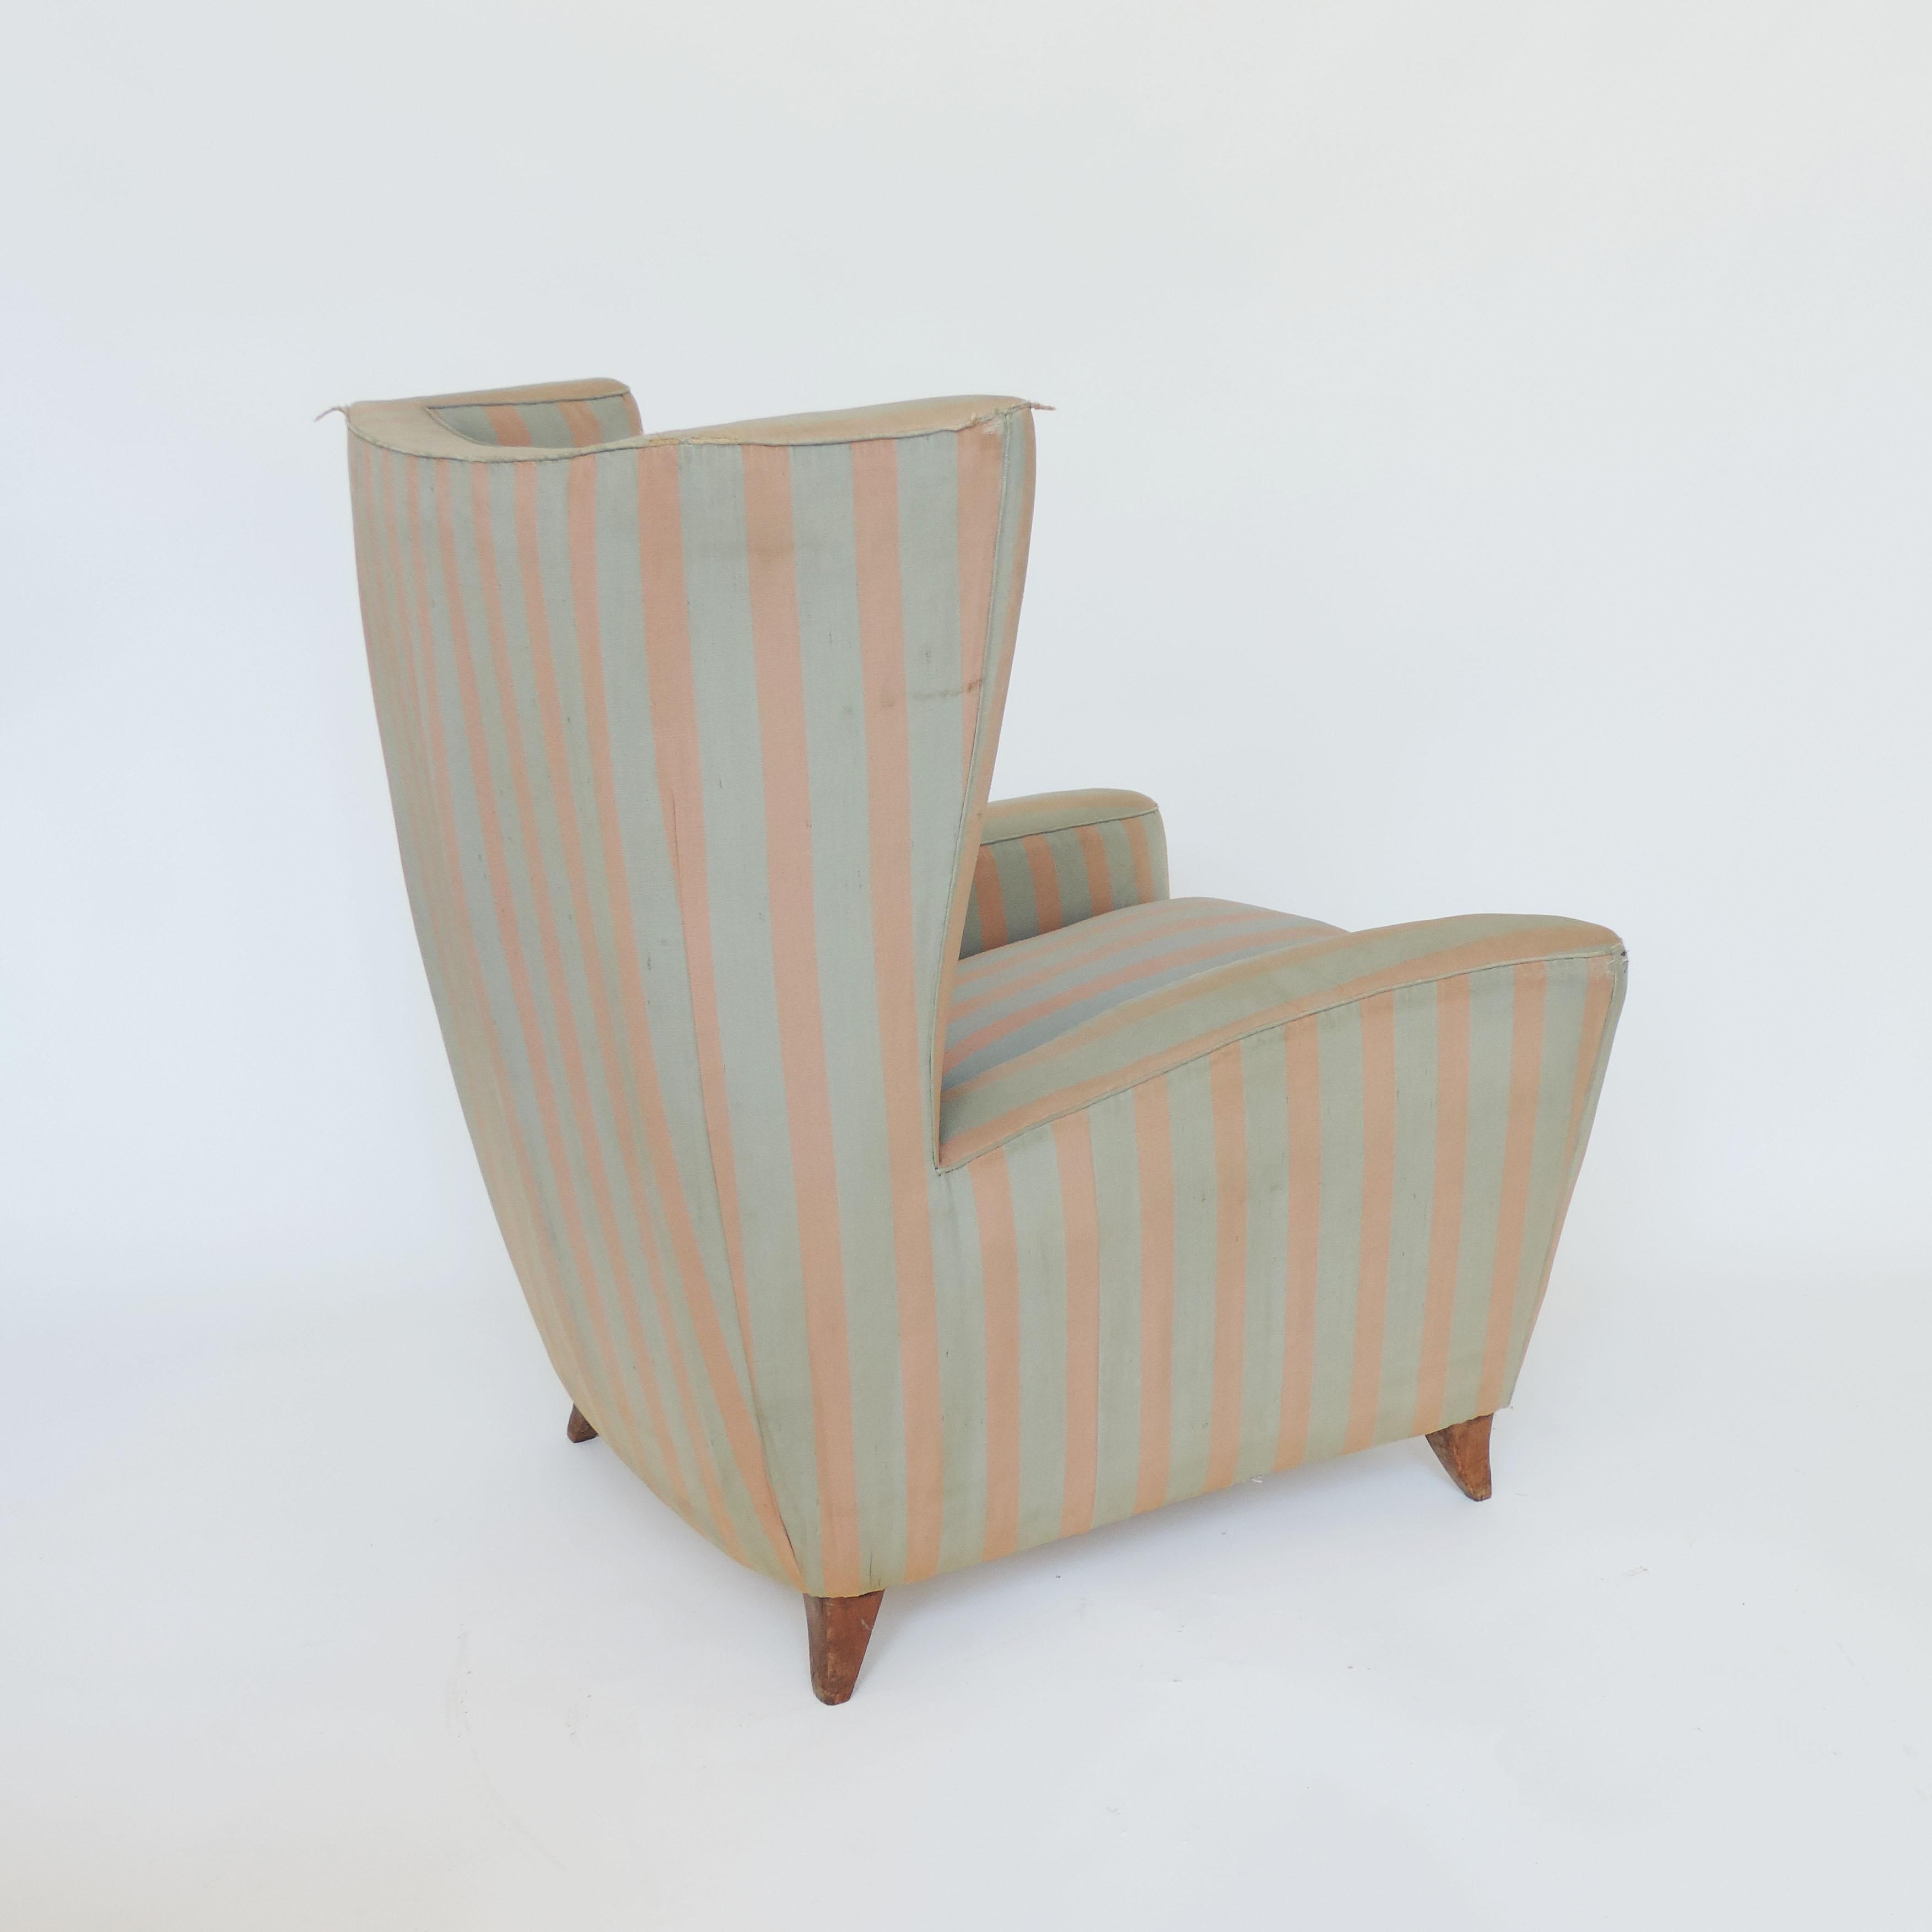 A spectacular Paolo Buffa 1940s armchair in original fabric.
All original. untouched.